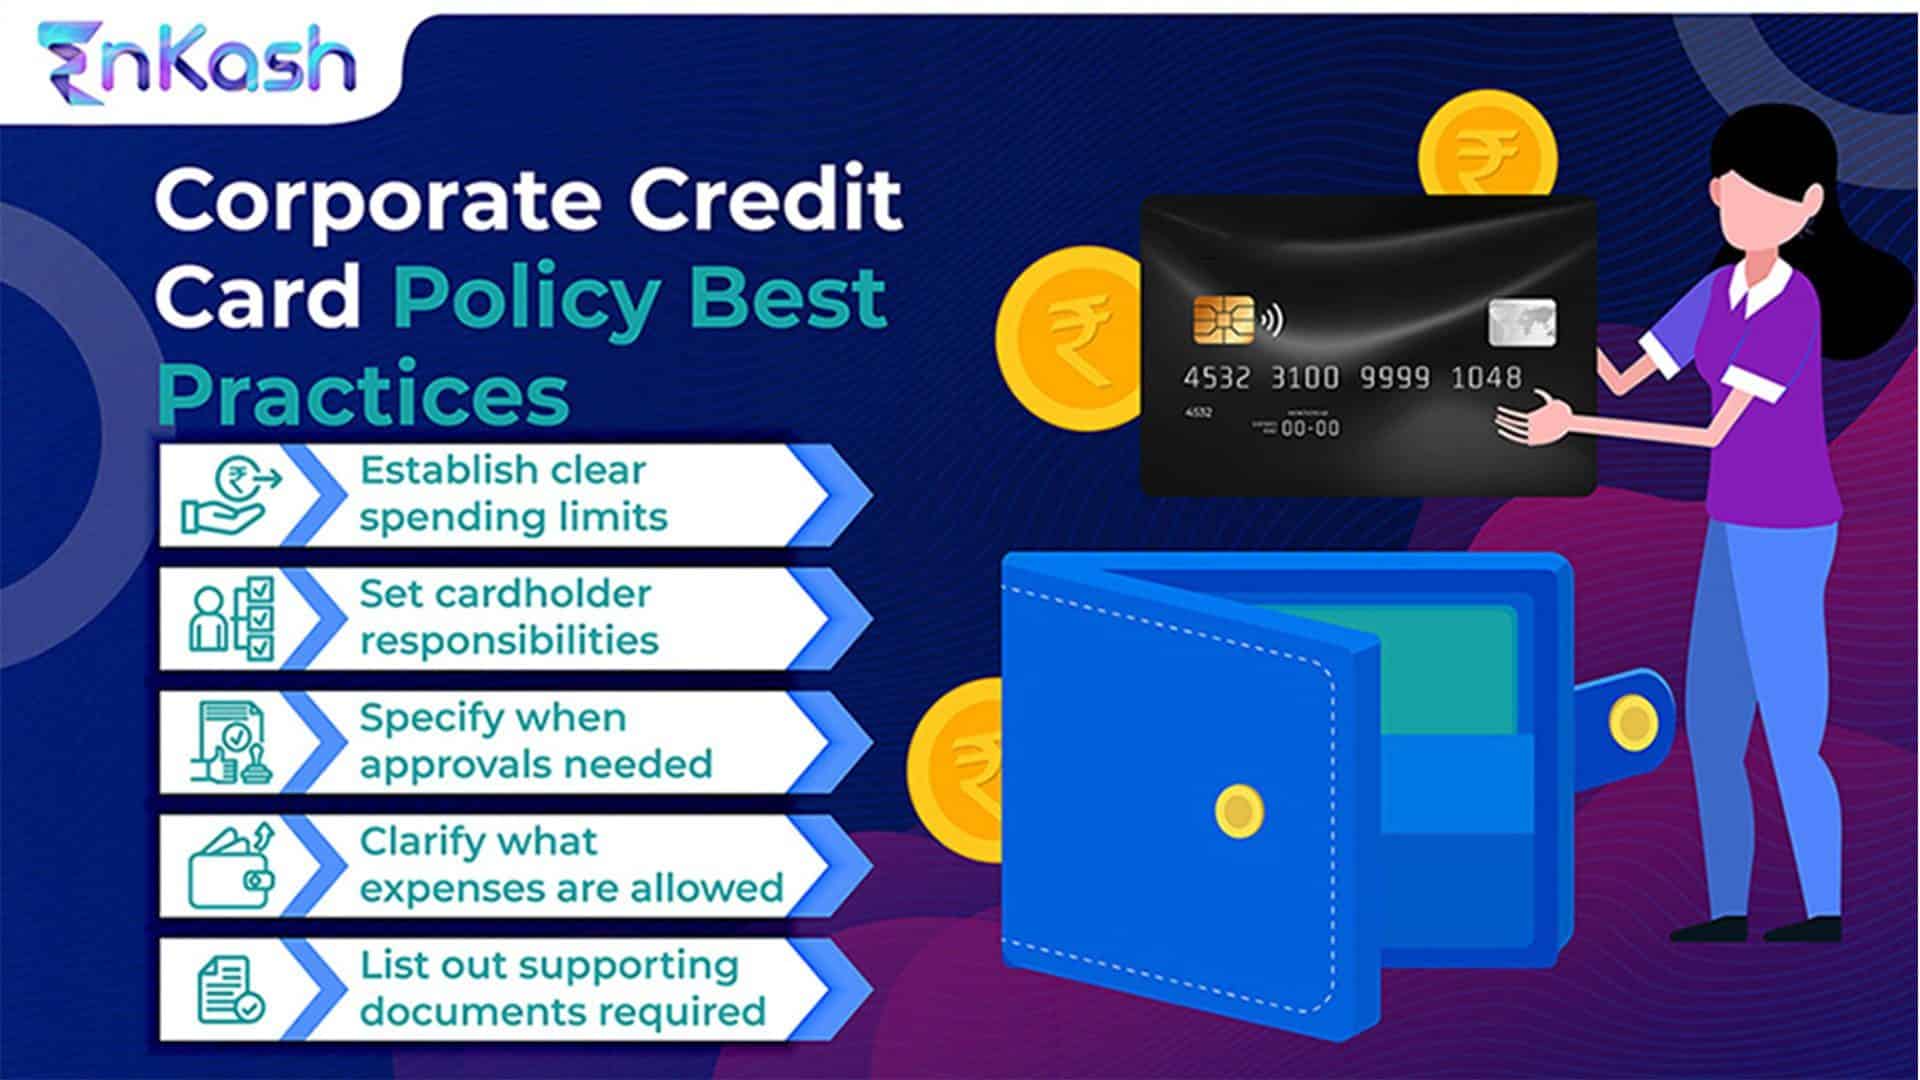 Corporate credit card policy best practices